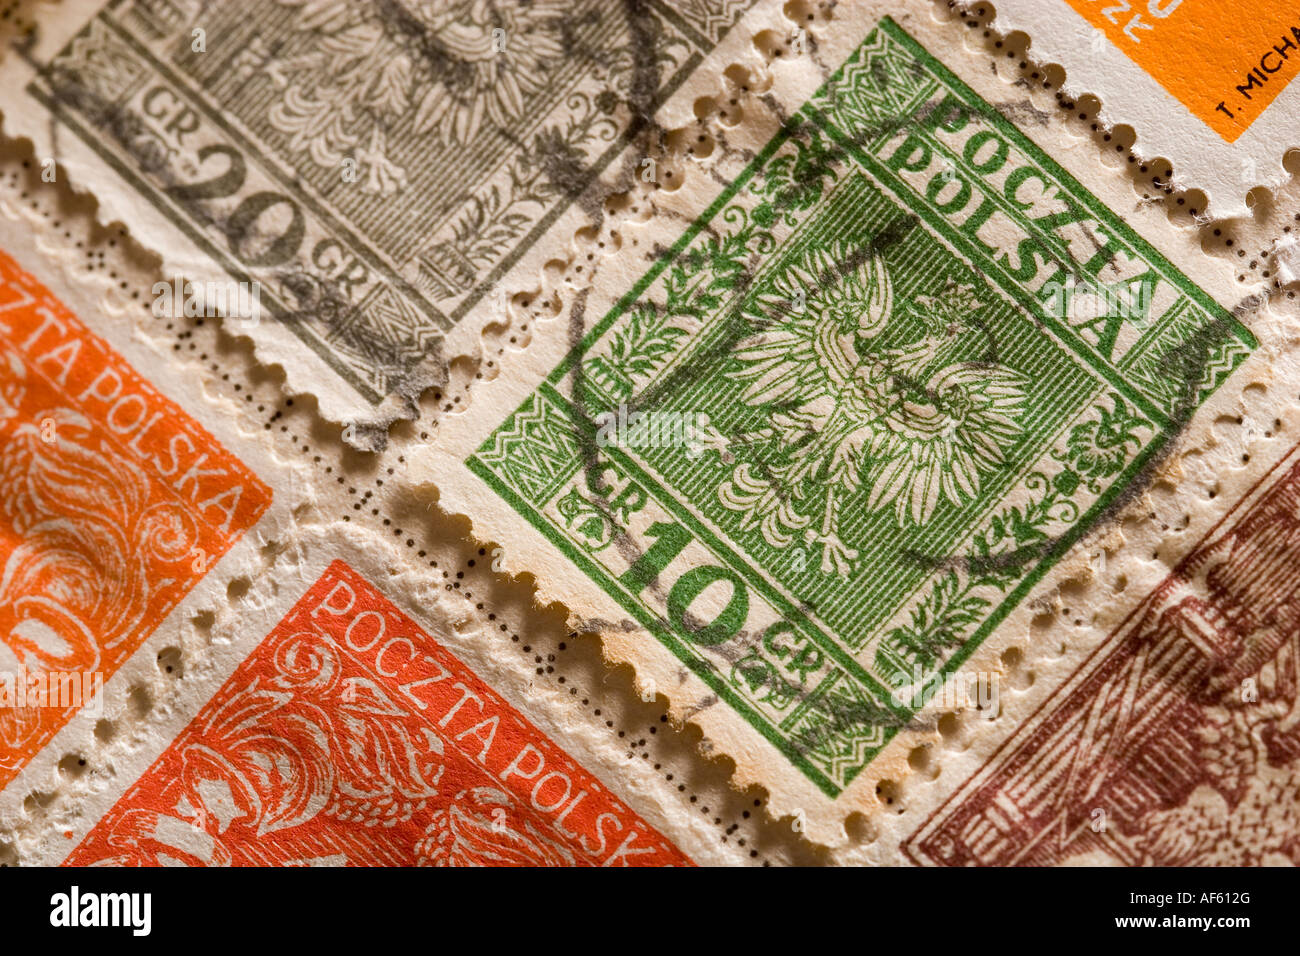 a study of old Polish stamps Stock Photo